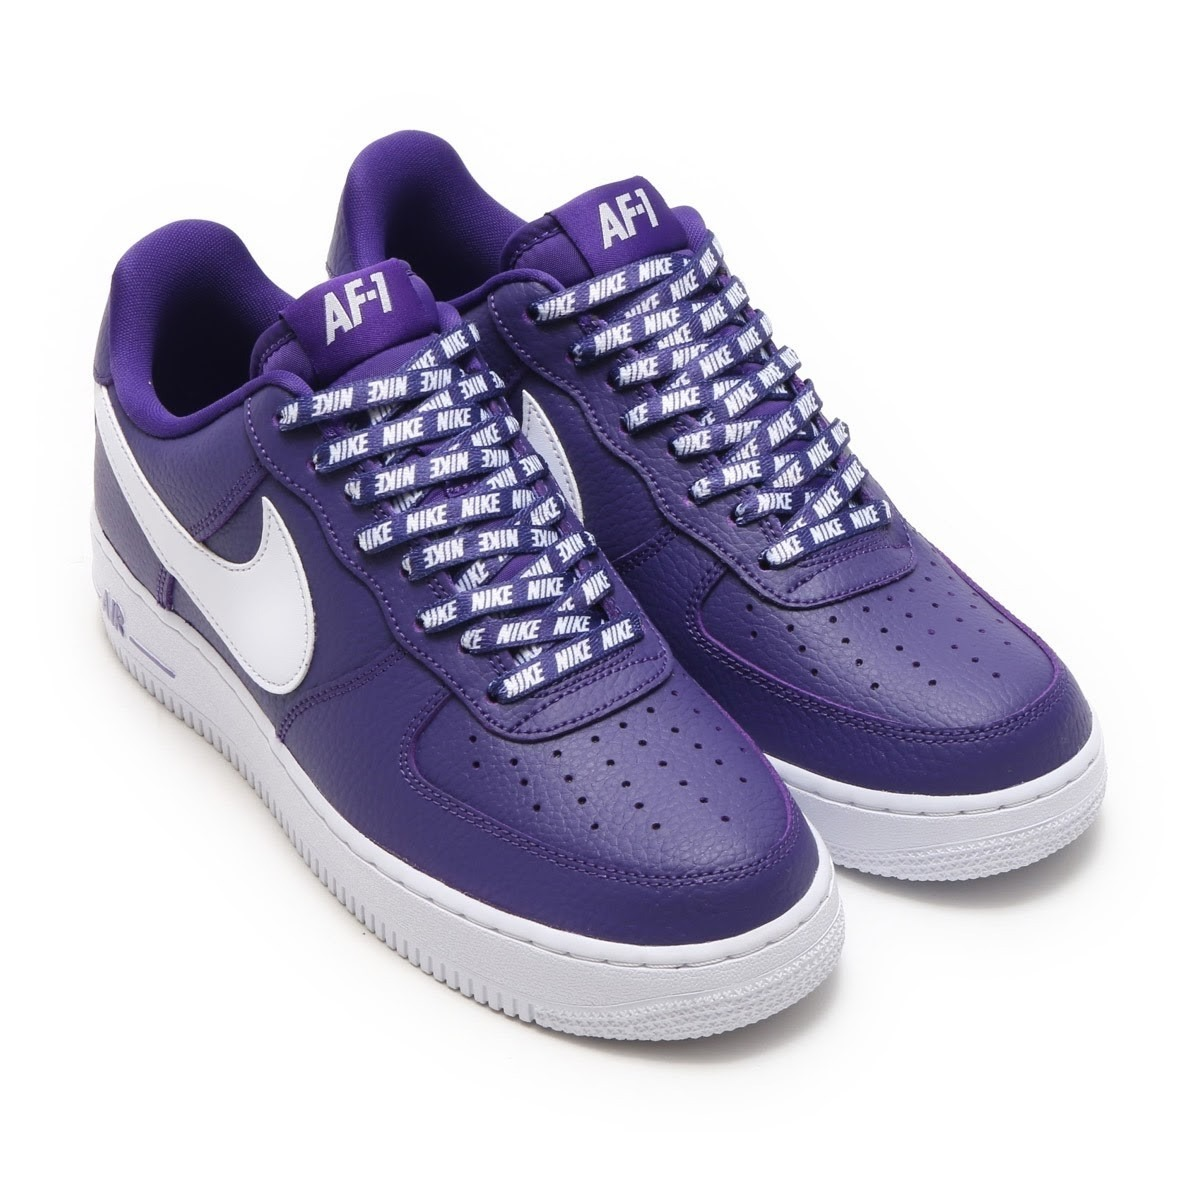 Now Available: NBA x Nike Air Force 1 